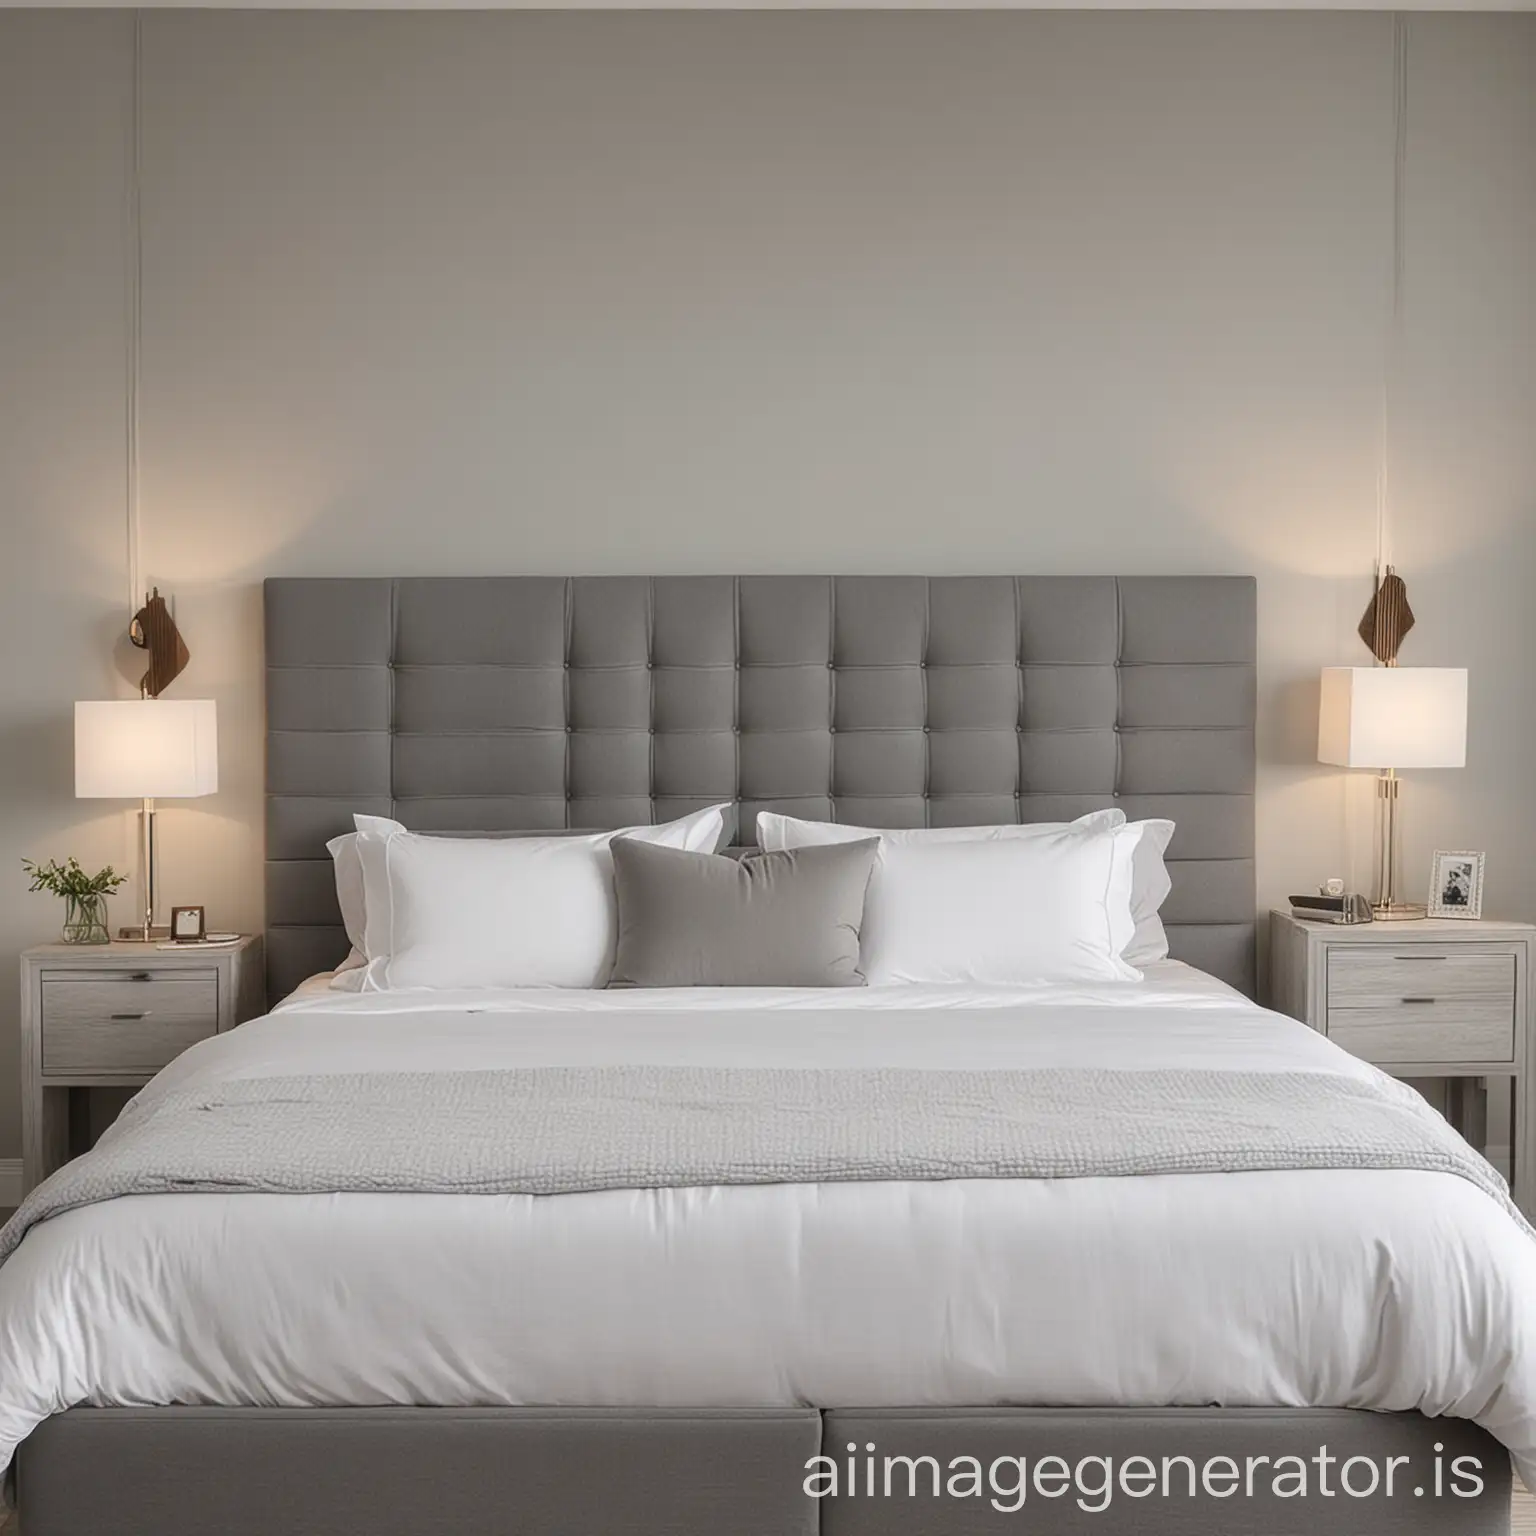 Spacious-King-Size-White-Bed-with-Grey-Rectangular-Headboard-and-Side-Tables-in-Minimalist-Bedroom